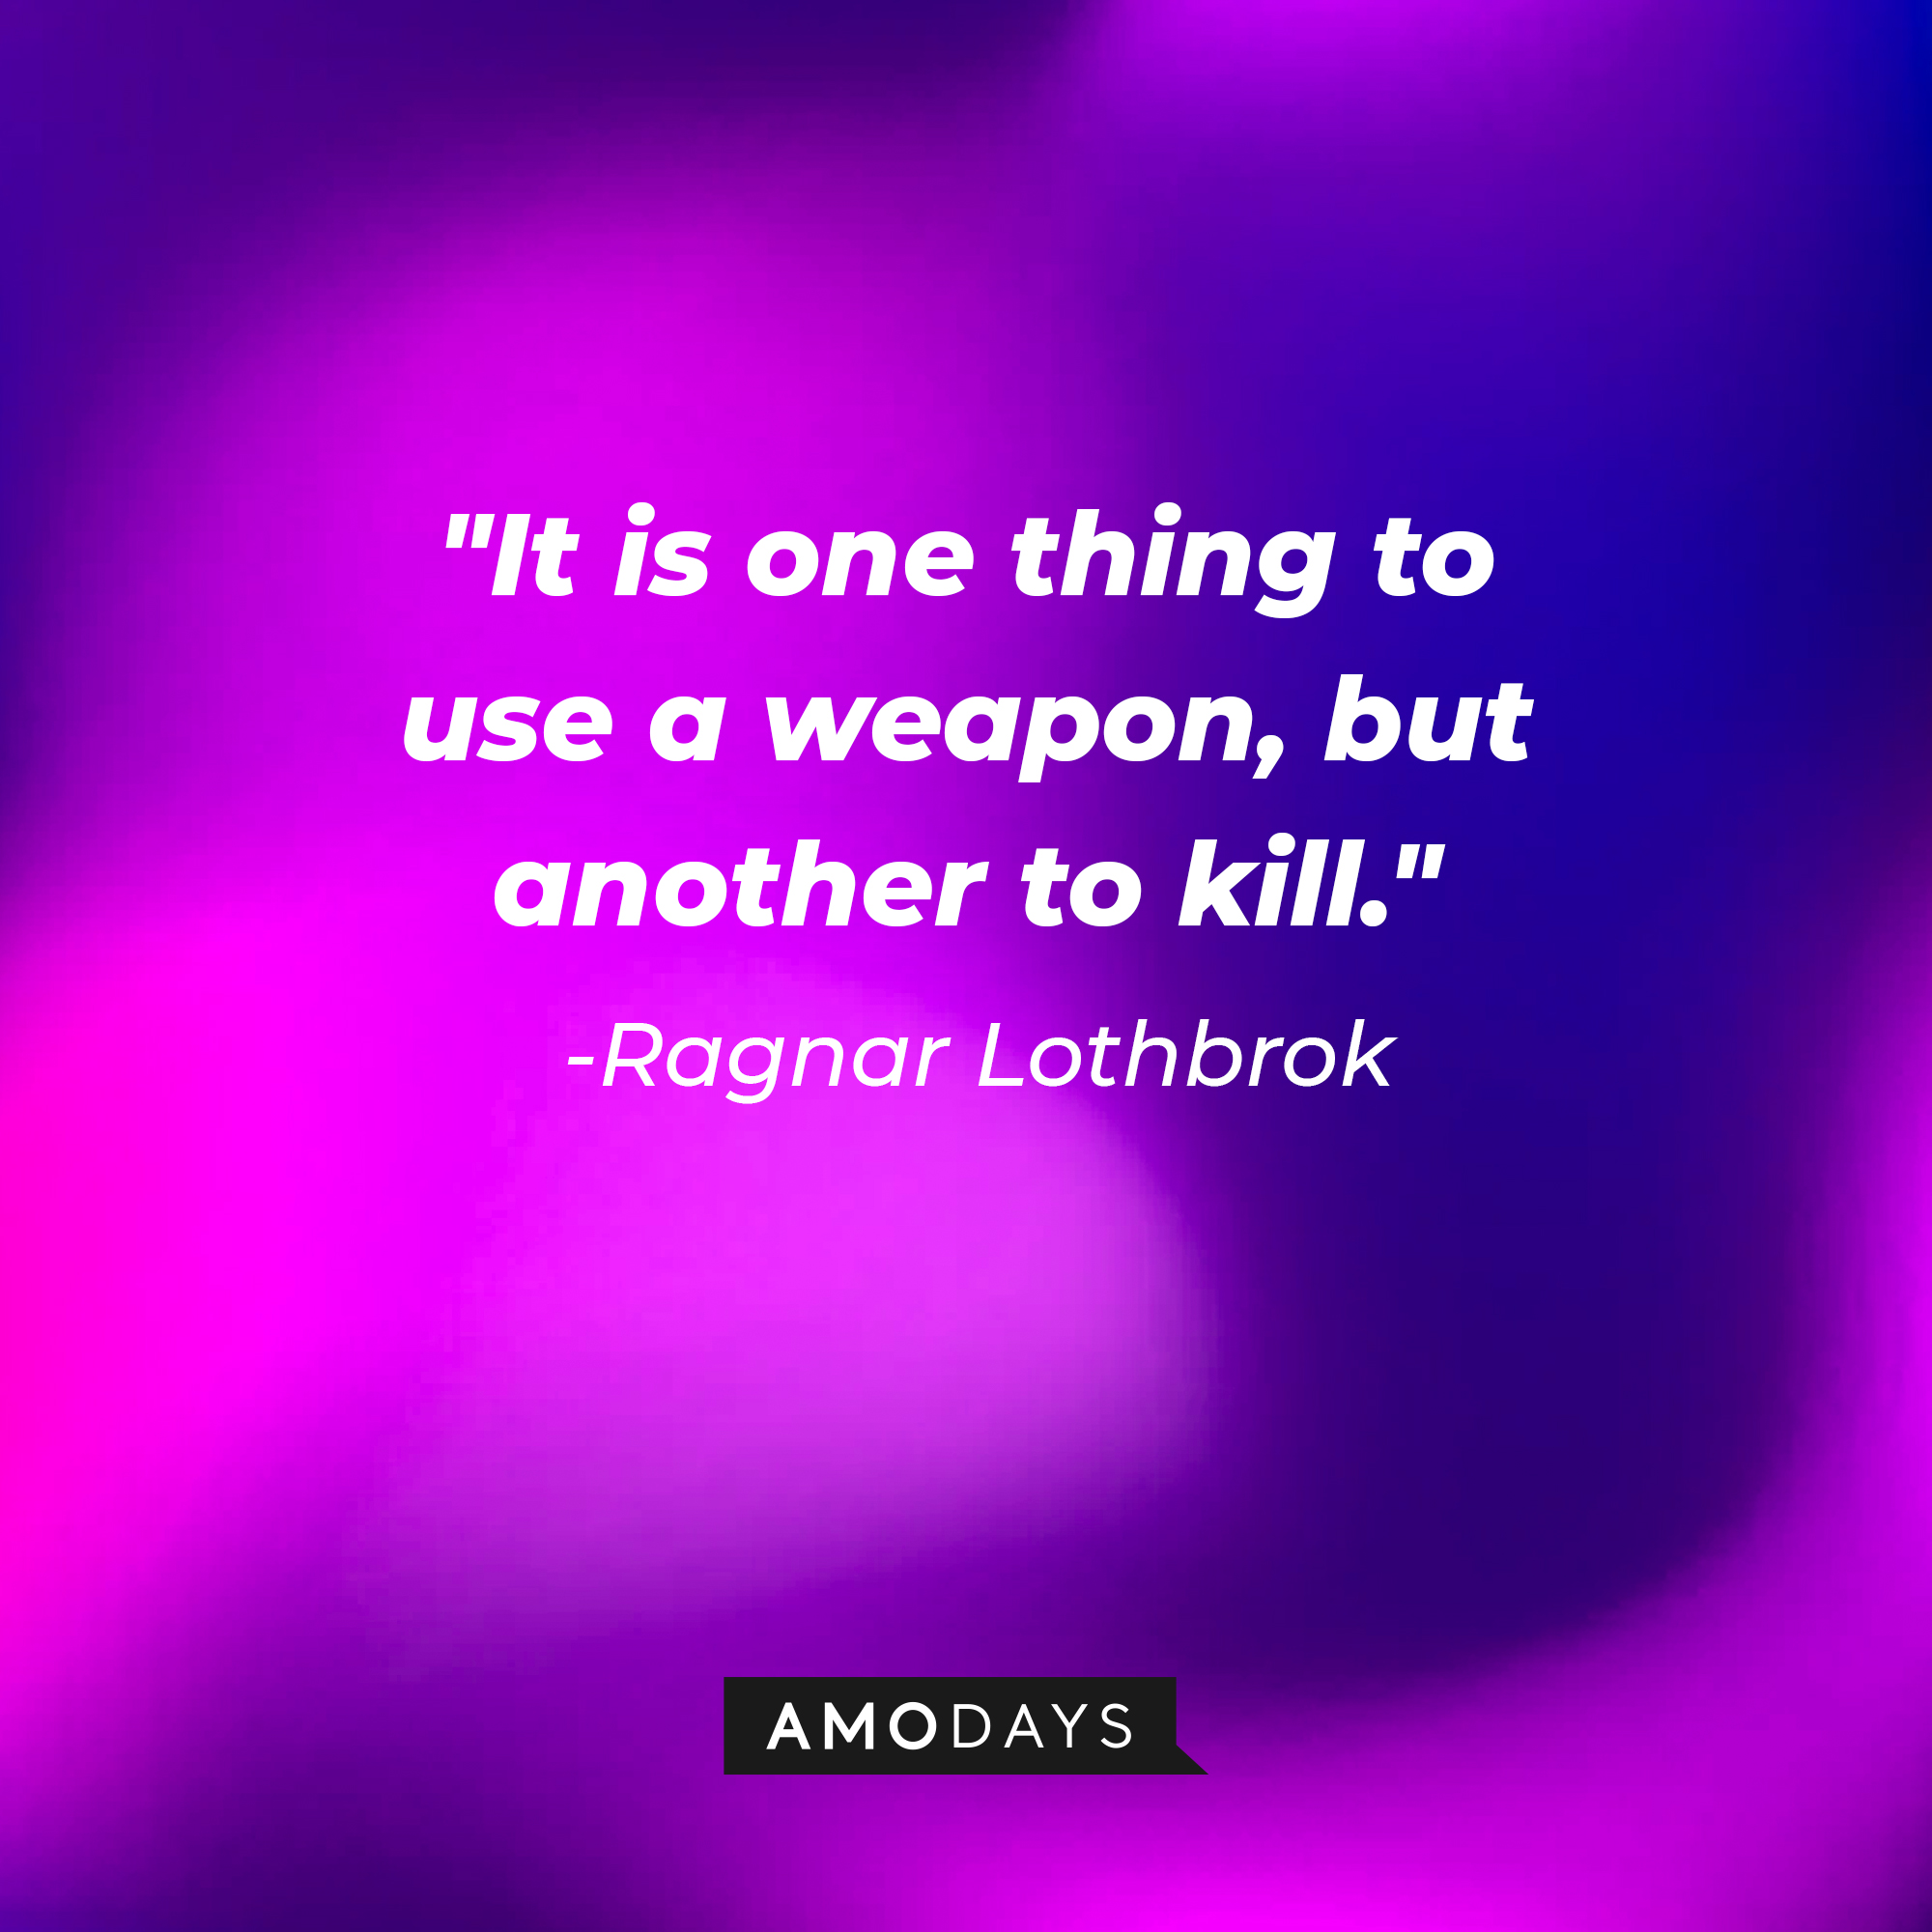 Ragnar Lothbrok's quote: "It is one thing to use a weapon, but another to kill." | Source: Amodays